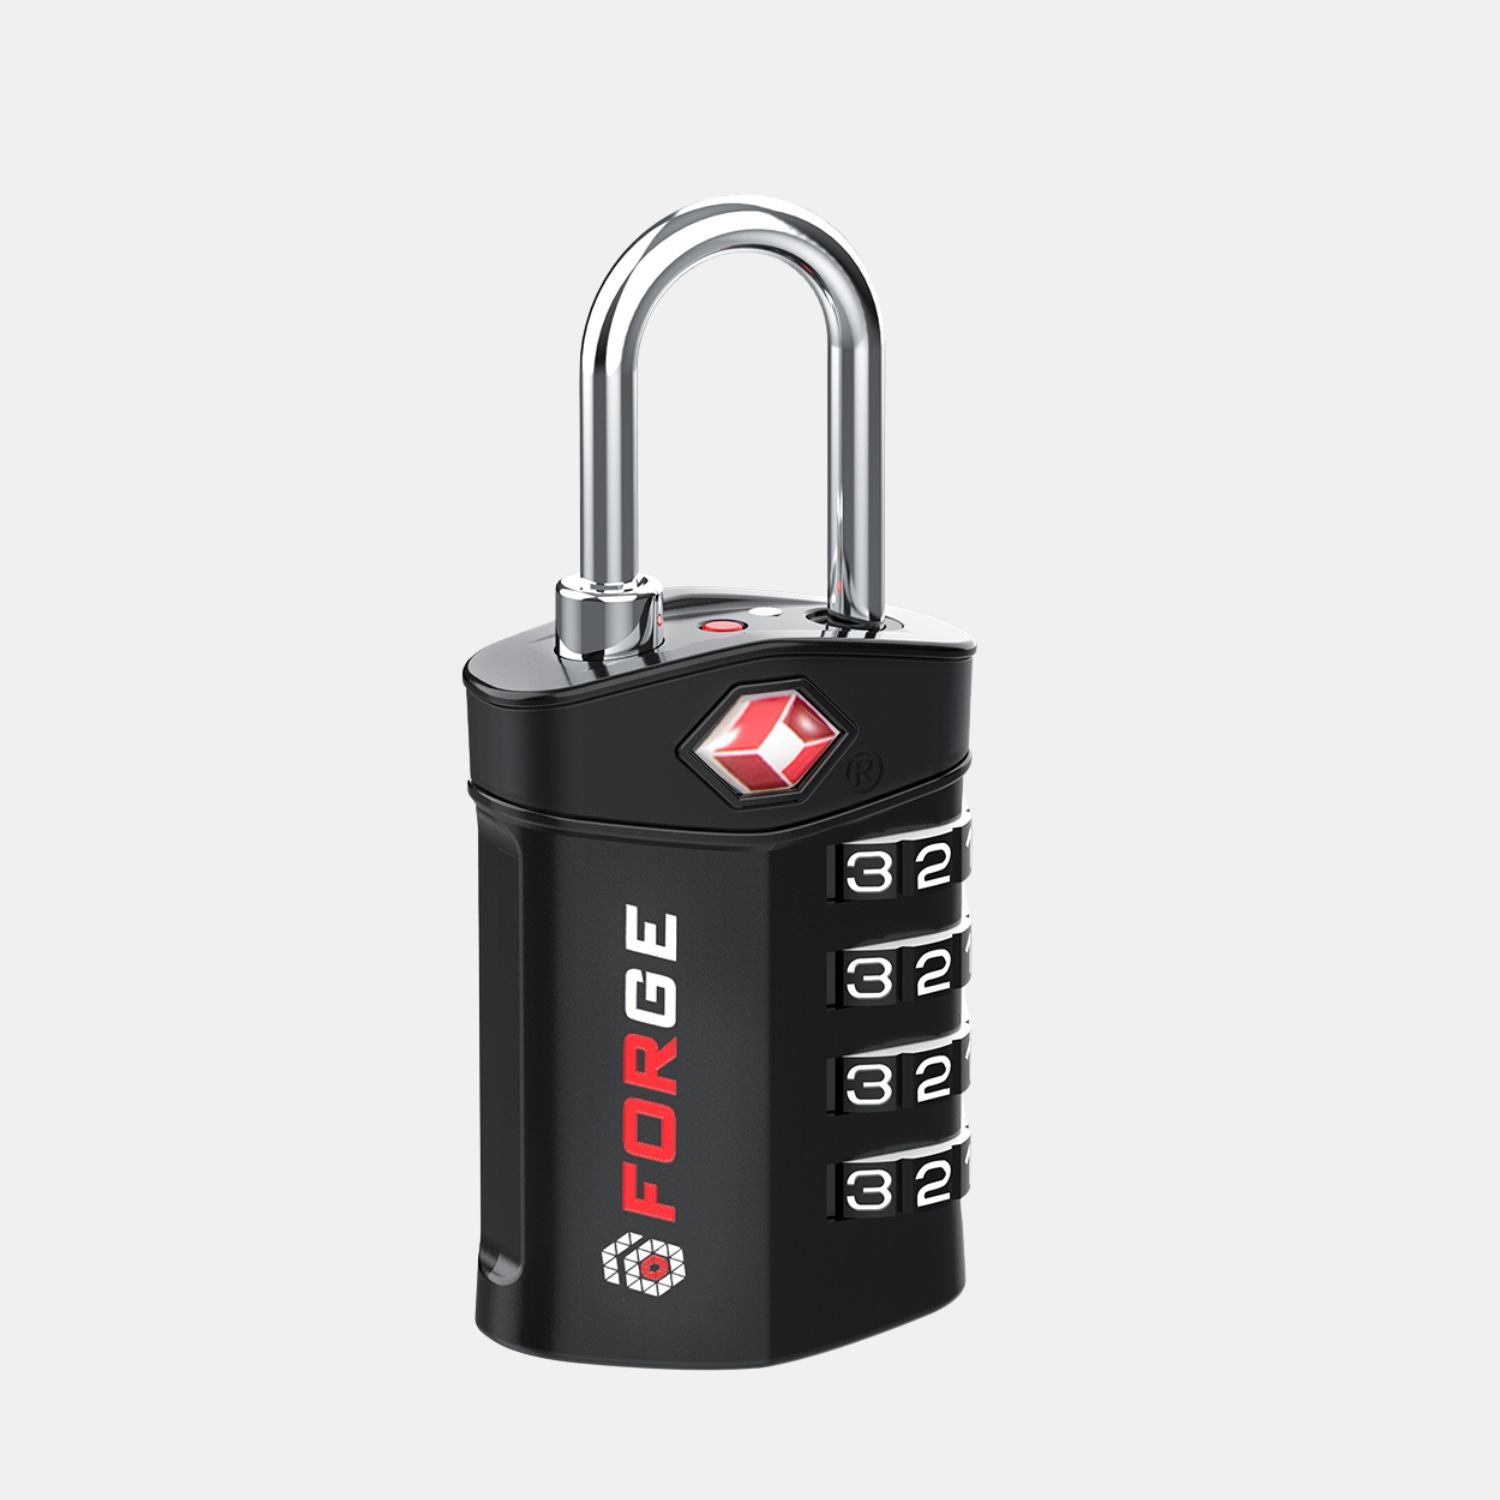 TSA Approved 4-Digit Combination Locks for Luggage and Suitcases. Open Alert, Alloy Body. Black 4 Locks